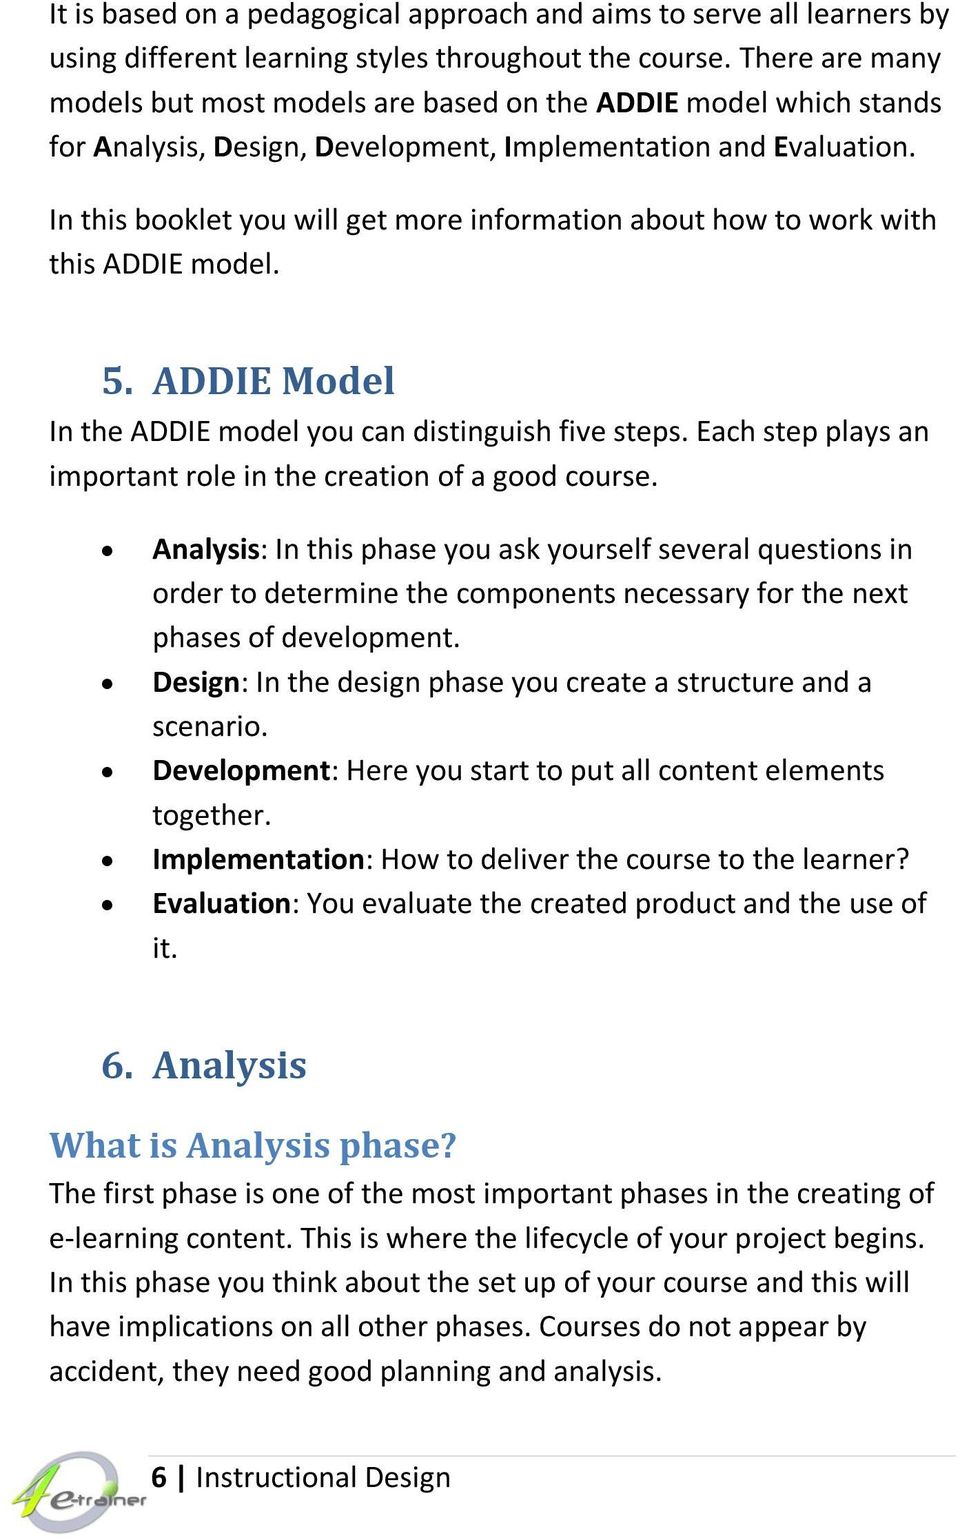 In this booklet you will get more information about how to work with this ADDIE model. 5. ADDIE Model In the ADDIE model you can distinguish five steps.